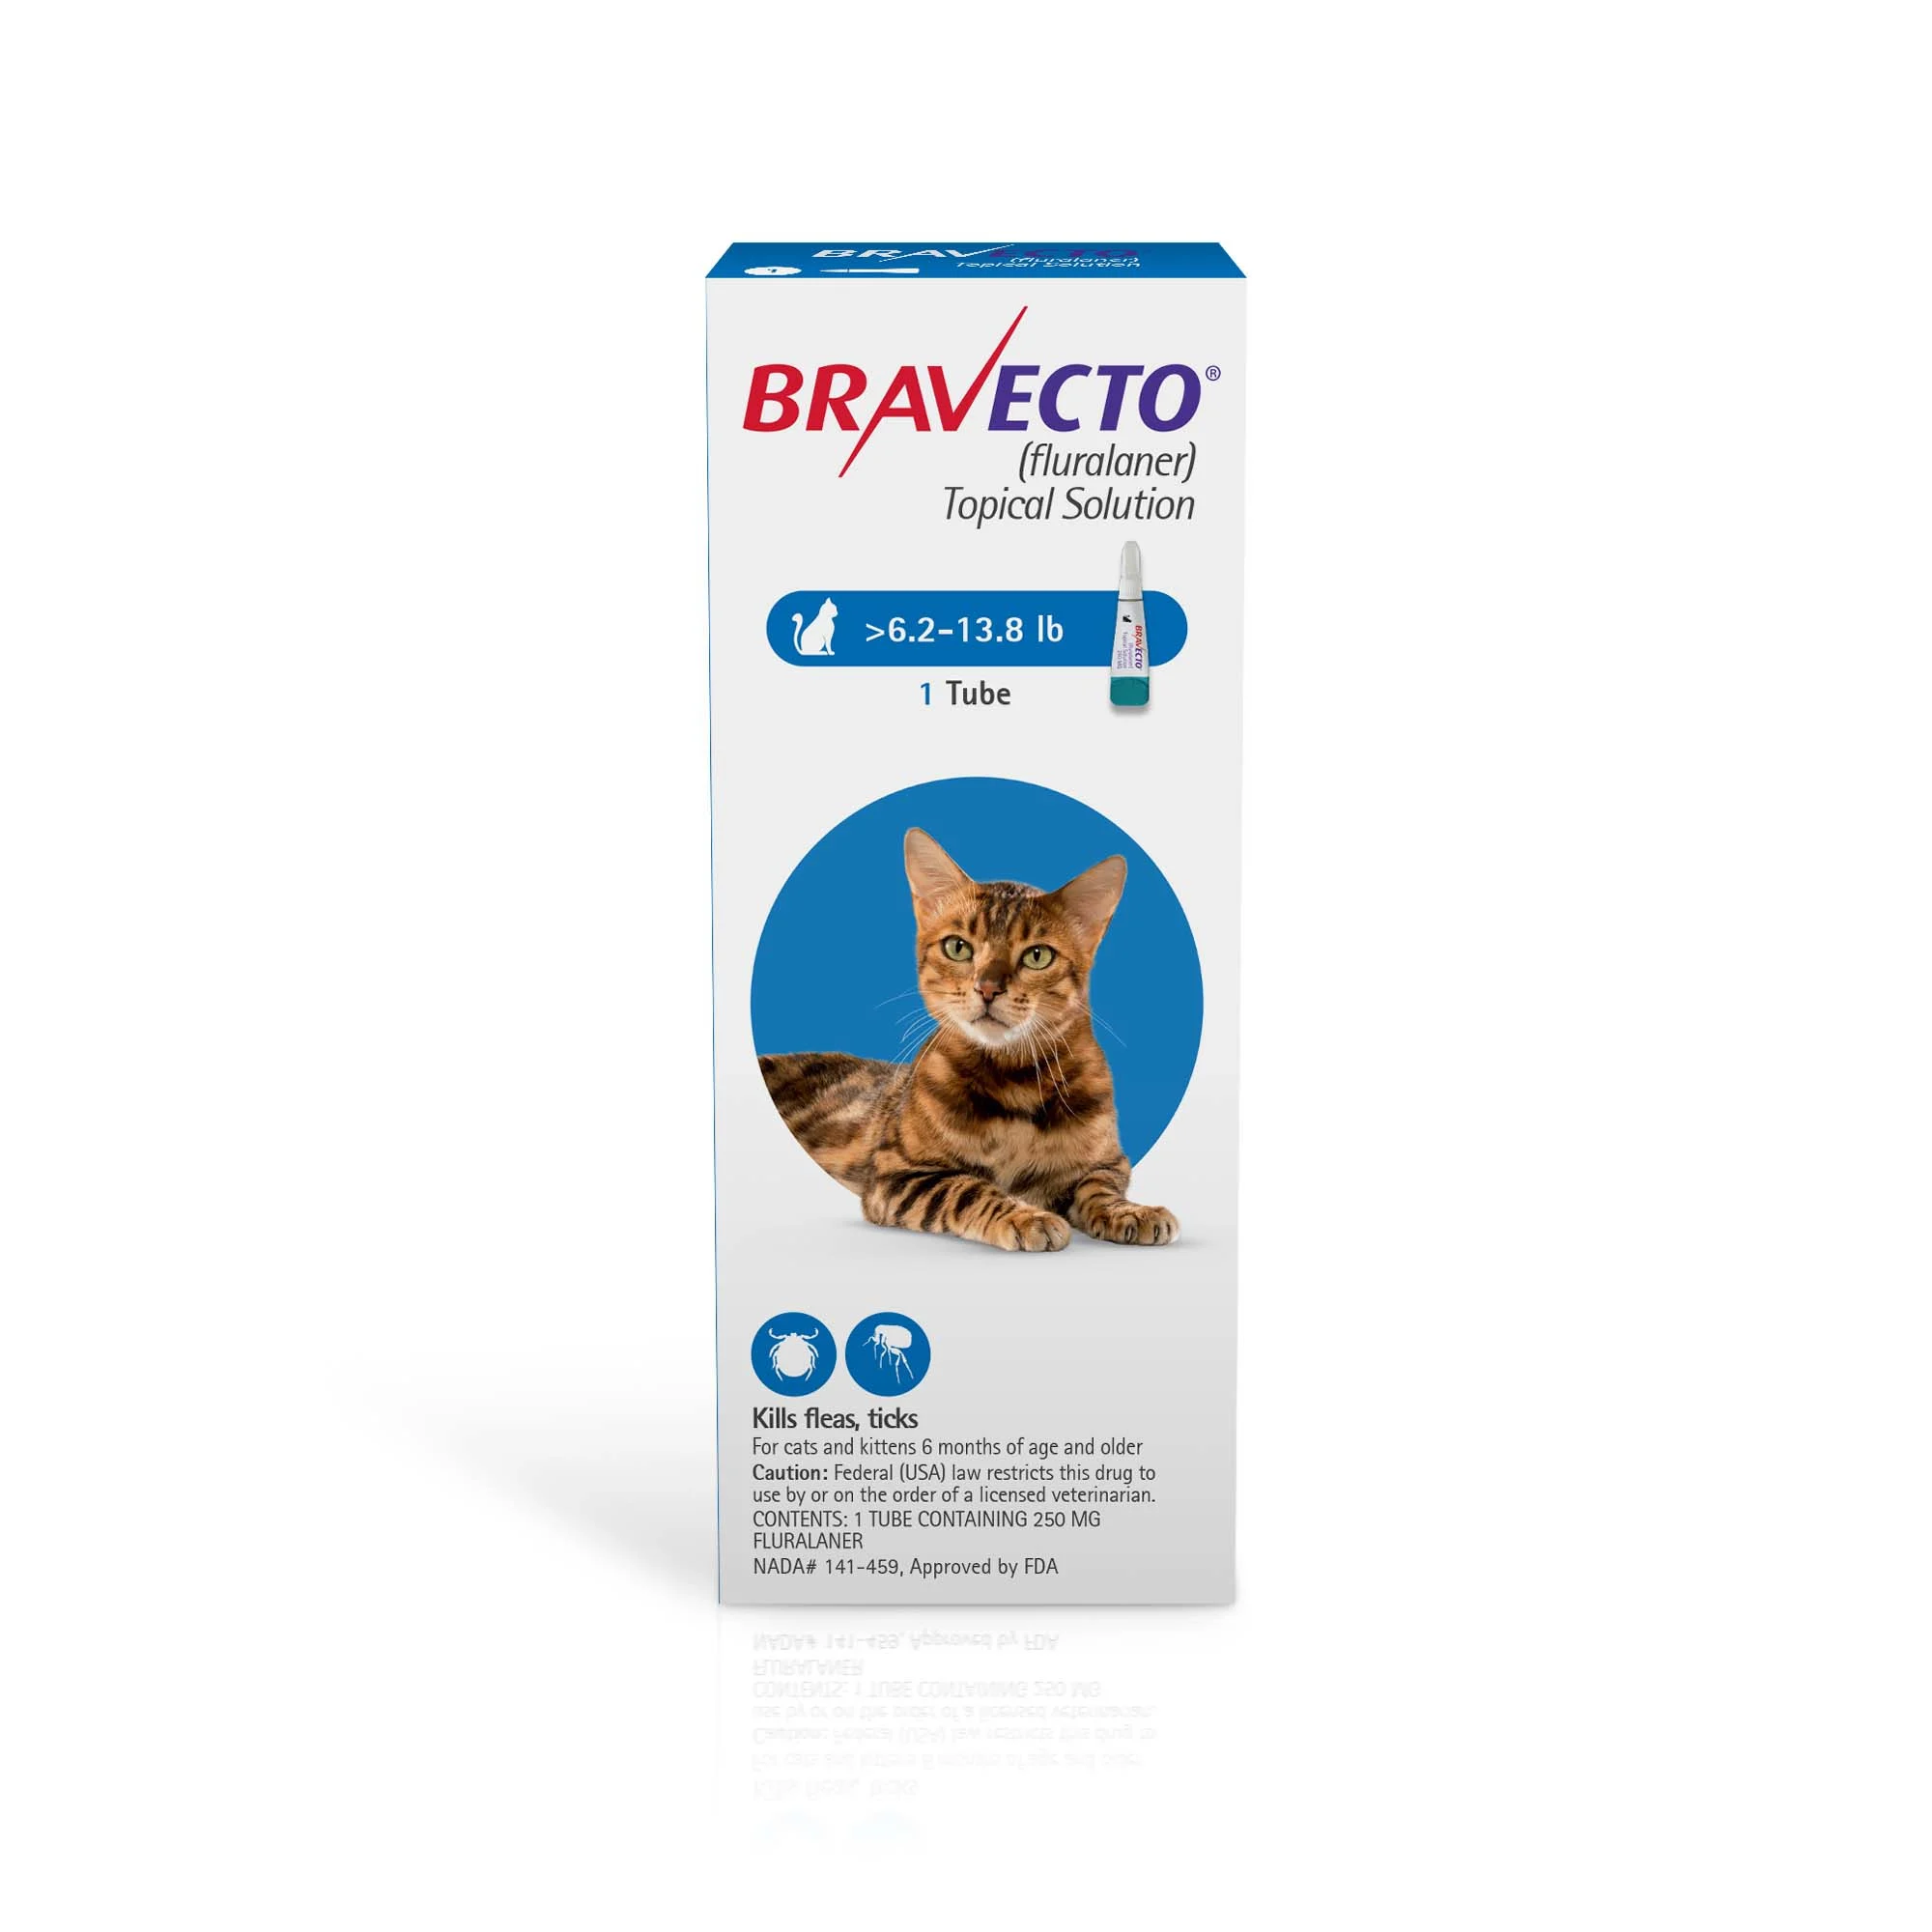 BRAVECTO COUPONS FOR CATS MEDICINE: HEAVY DISCOUNT AVAILABLE